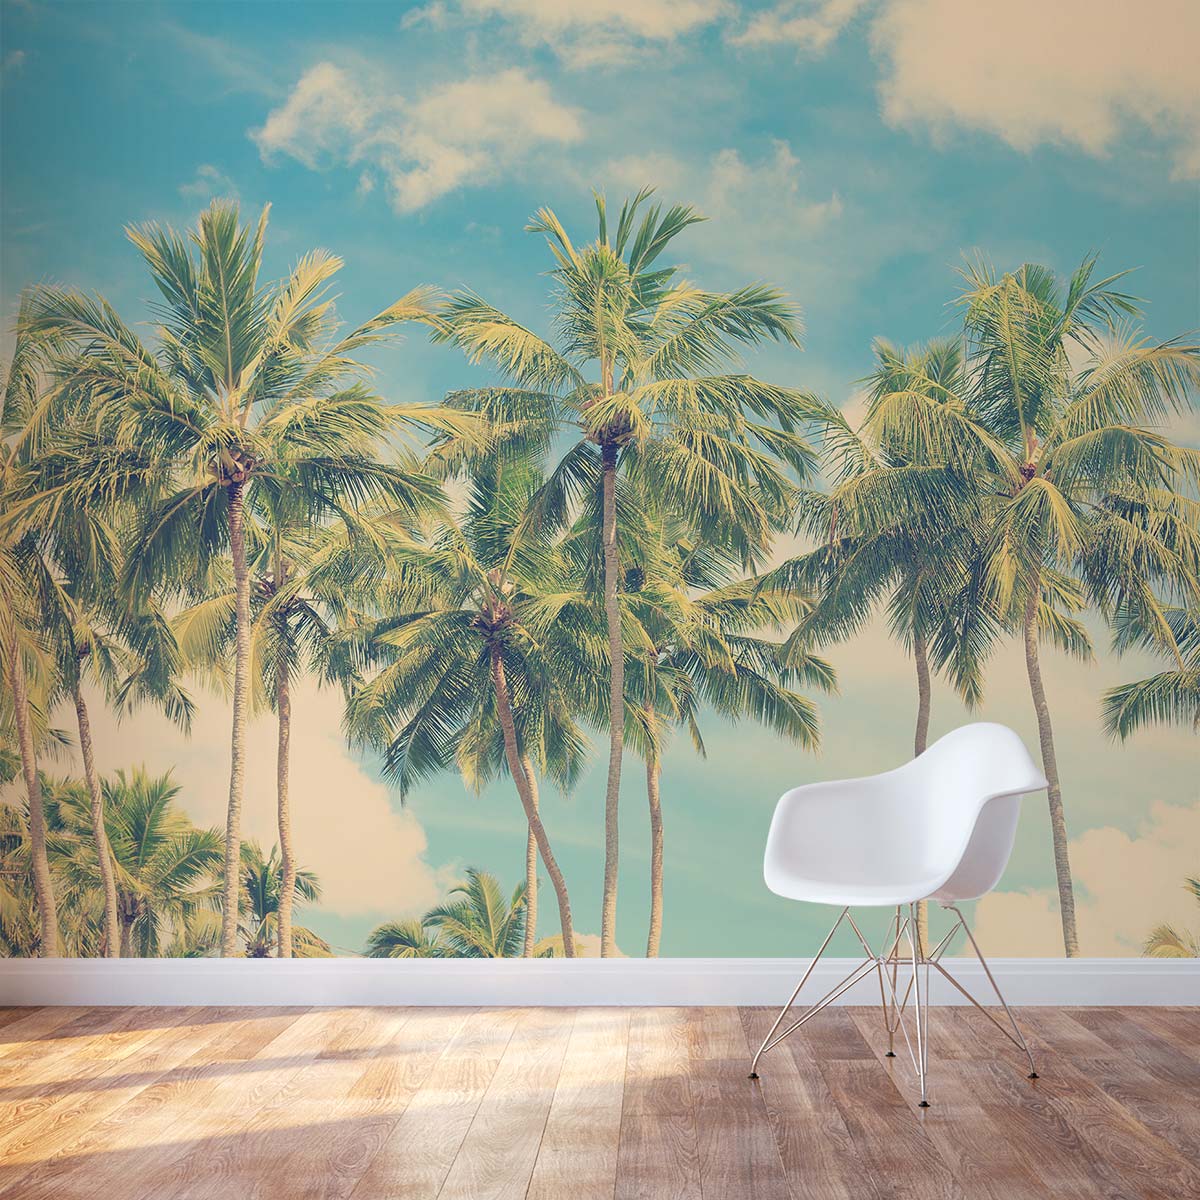 Vintage Palm Tree Wall Mural | Vintage Palm Wall Decal